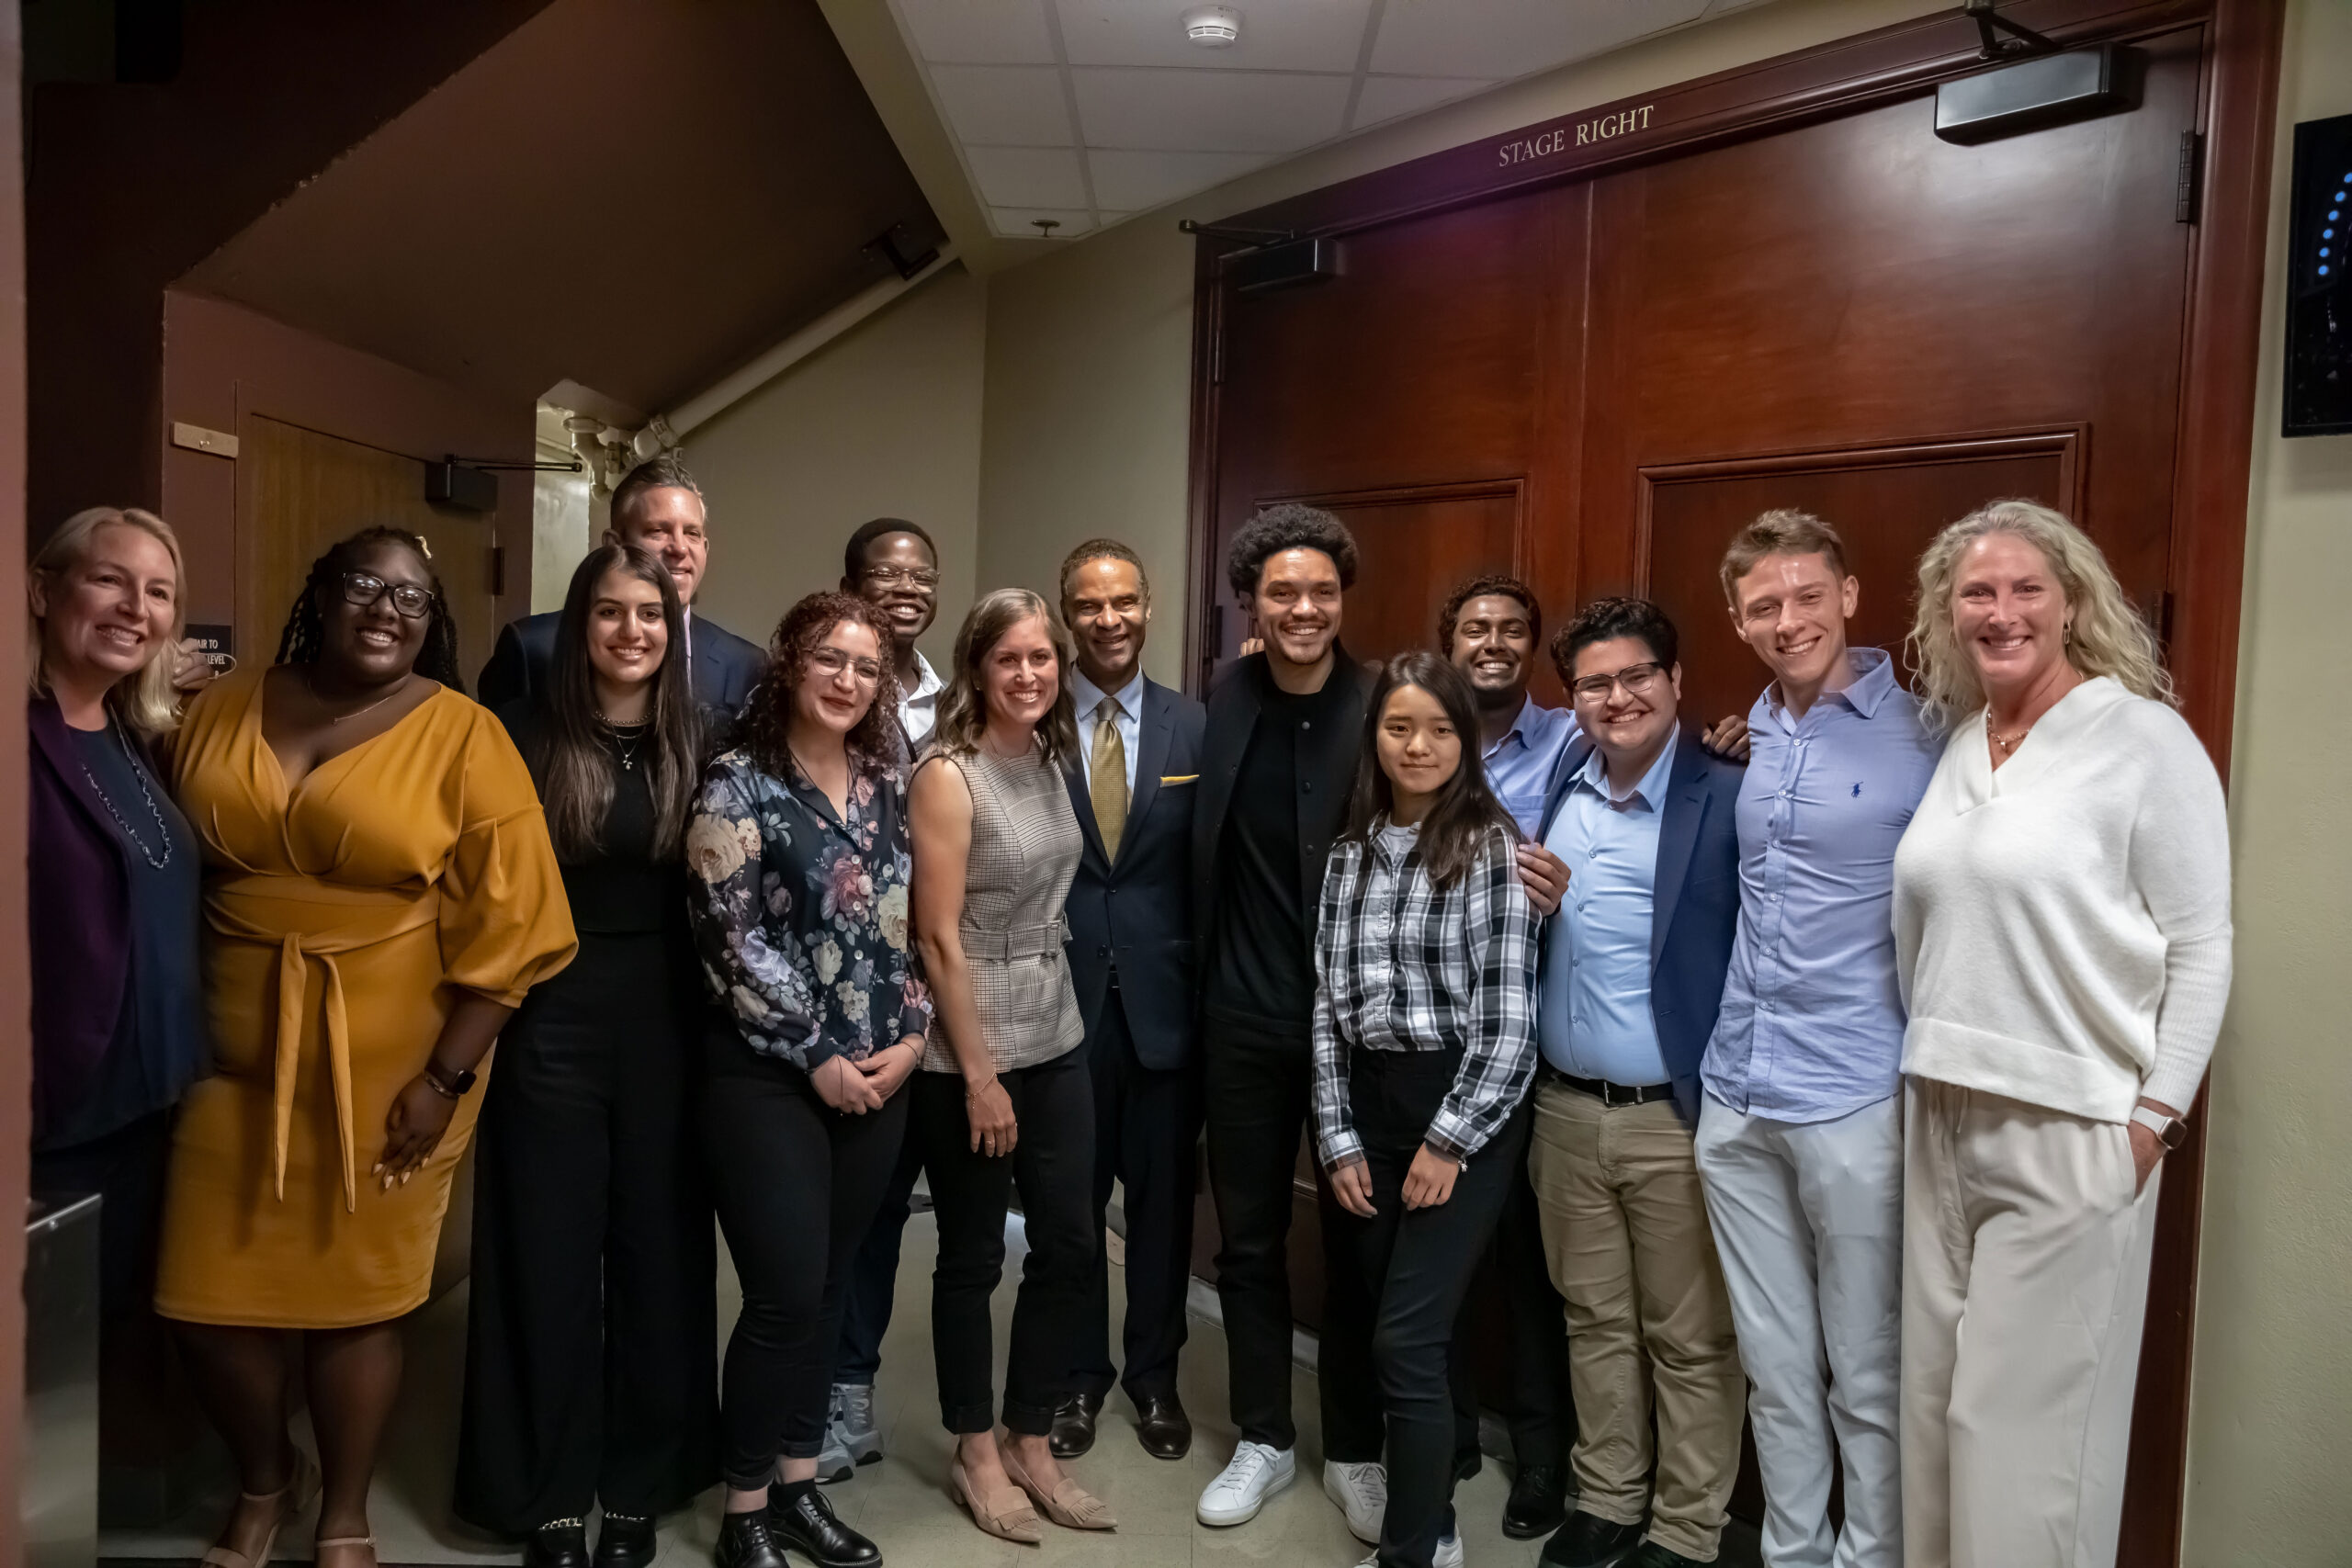 Alec Gallimore, Dean of Engineering, and Trevor Noah pose for photo with students from Michigan Engineering